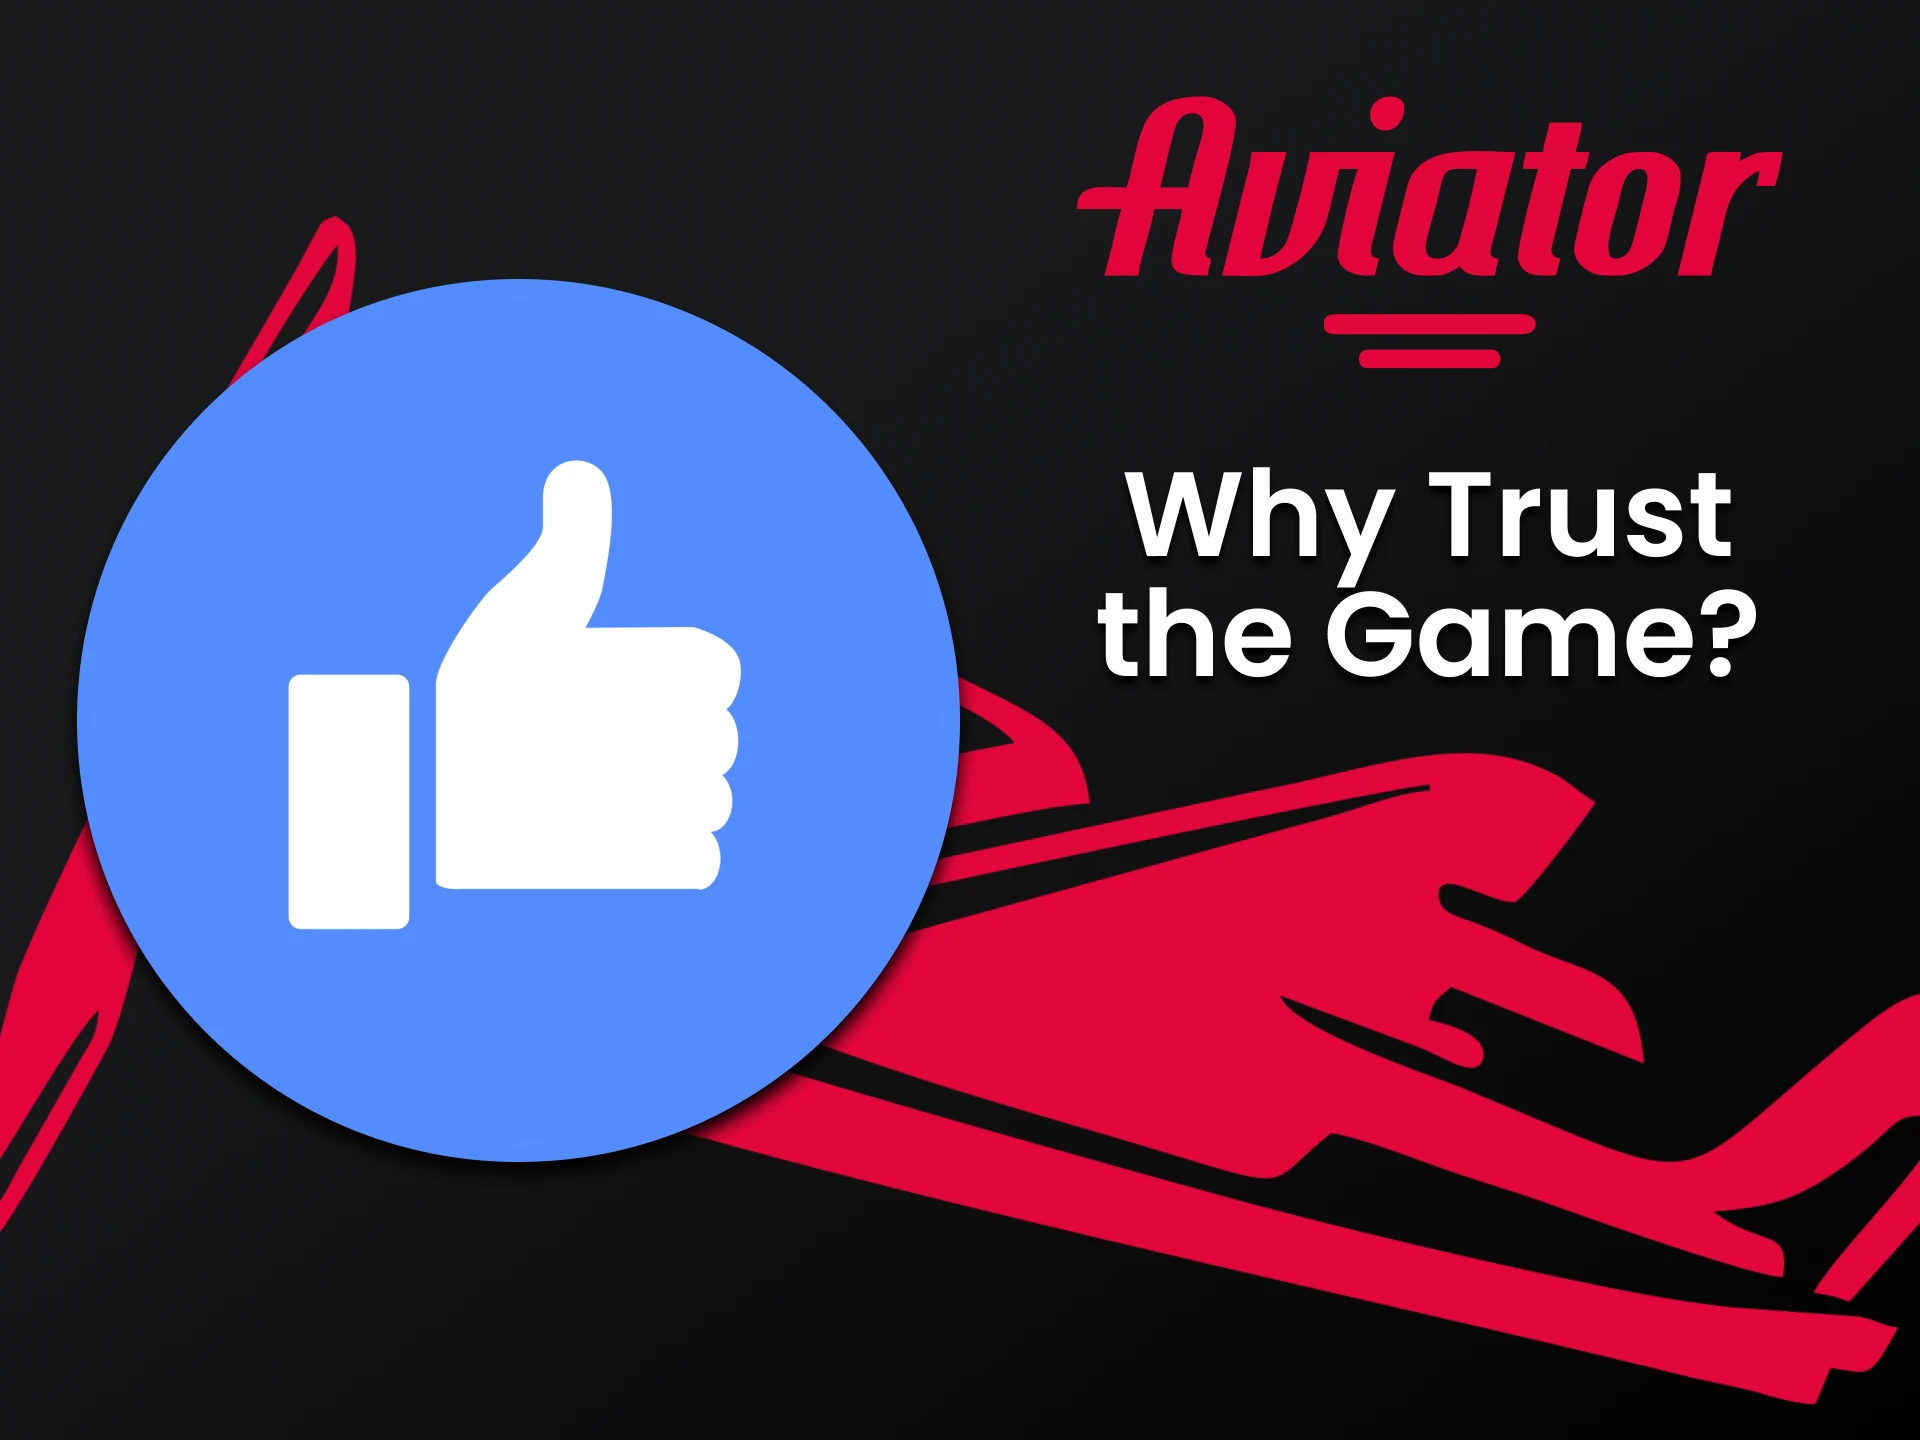 We will tell you why players choose the Aviator.